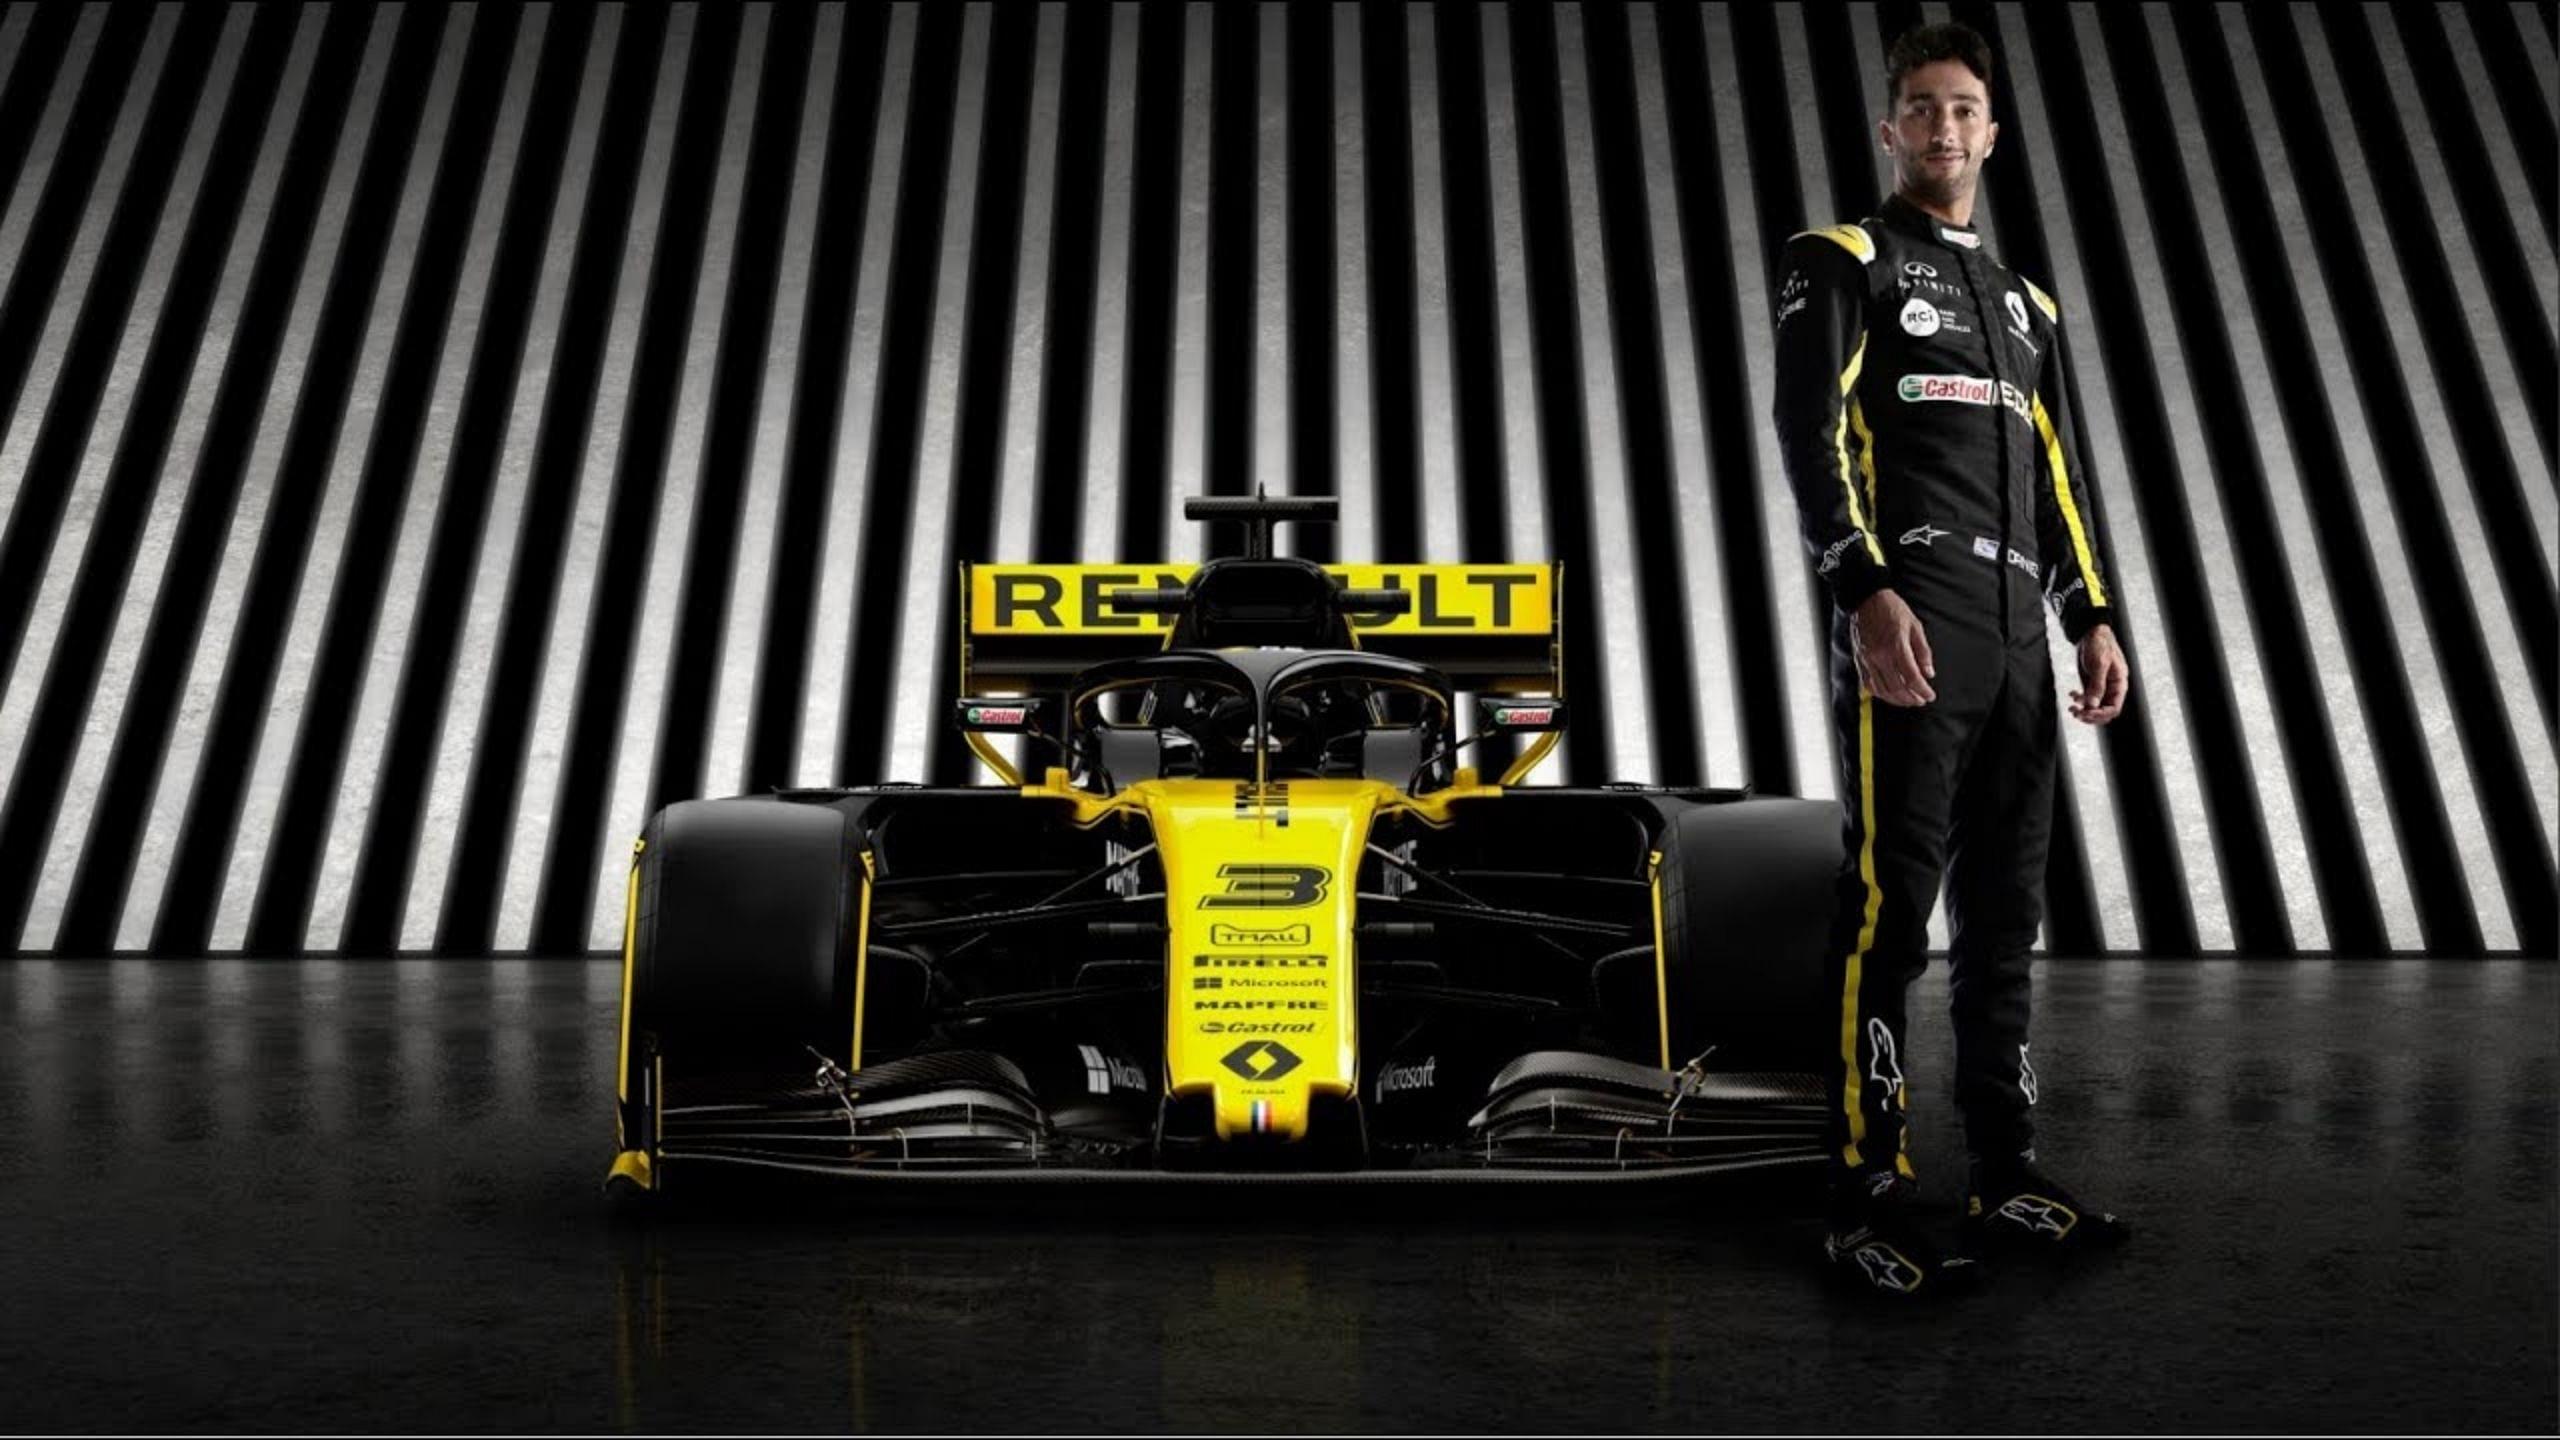 "Hearing a few F-bombs from Cyril" - Daniel Ricciardo reminiscences his days with Renault as he begins journey at McLaren